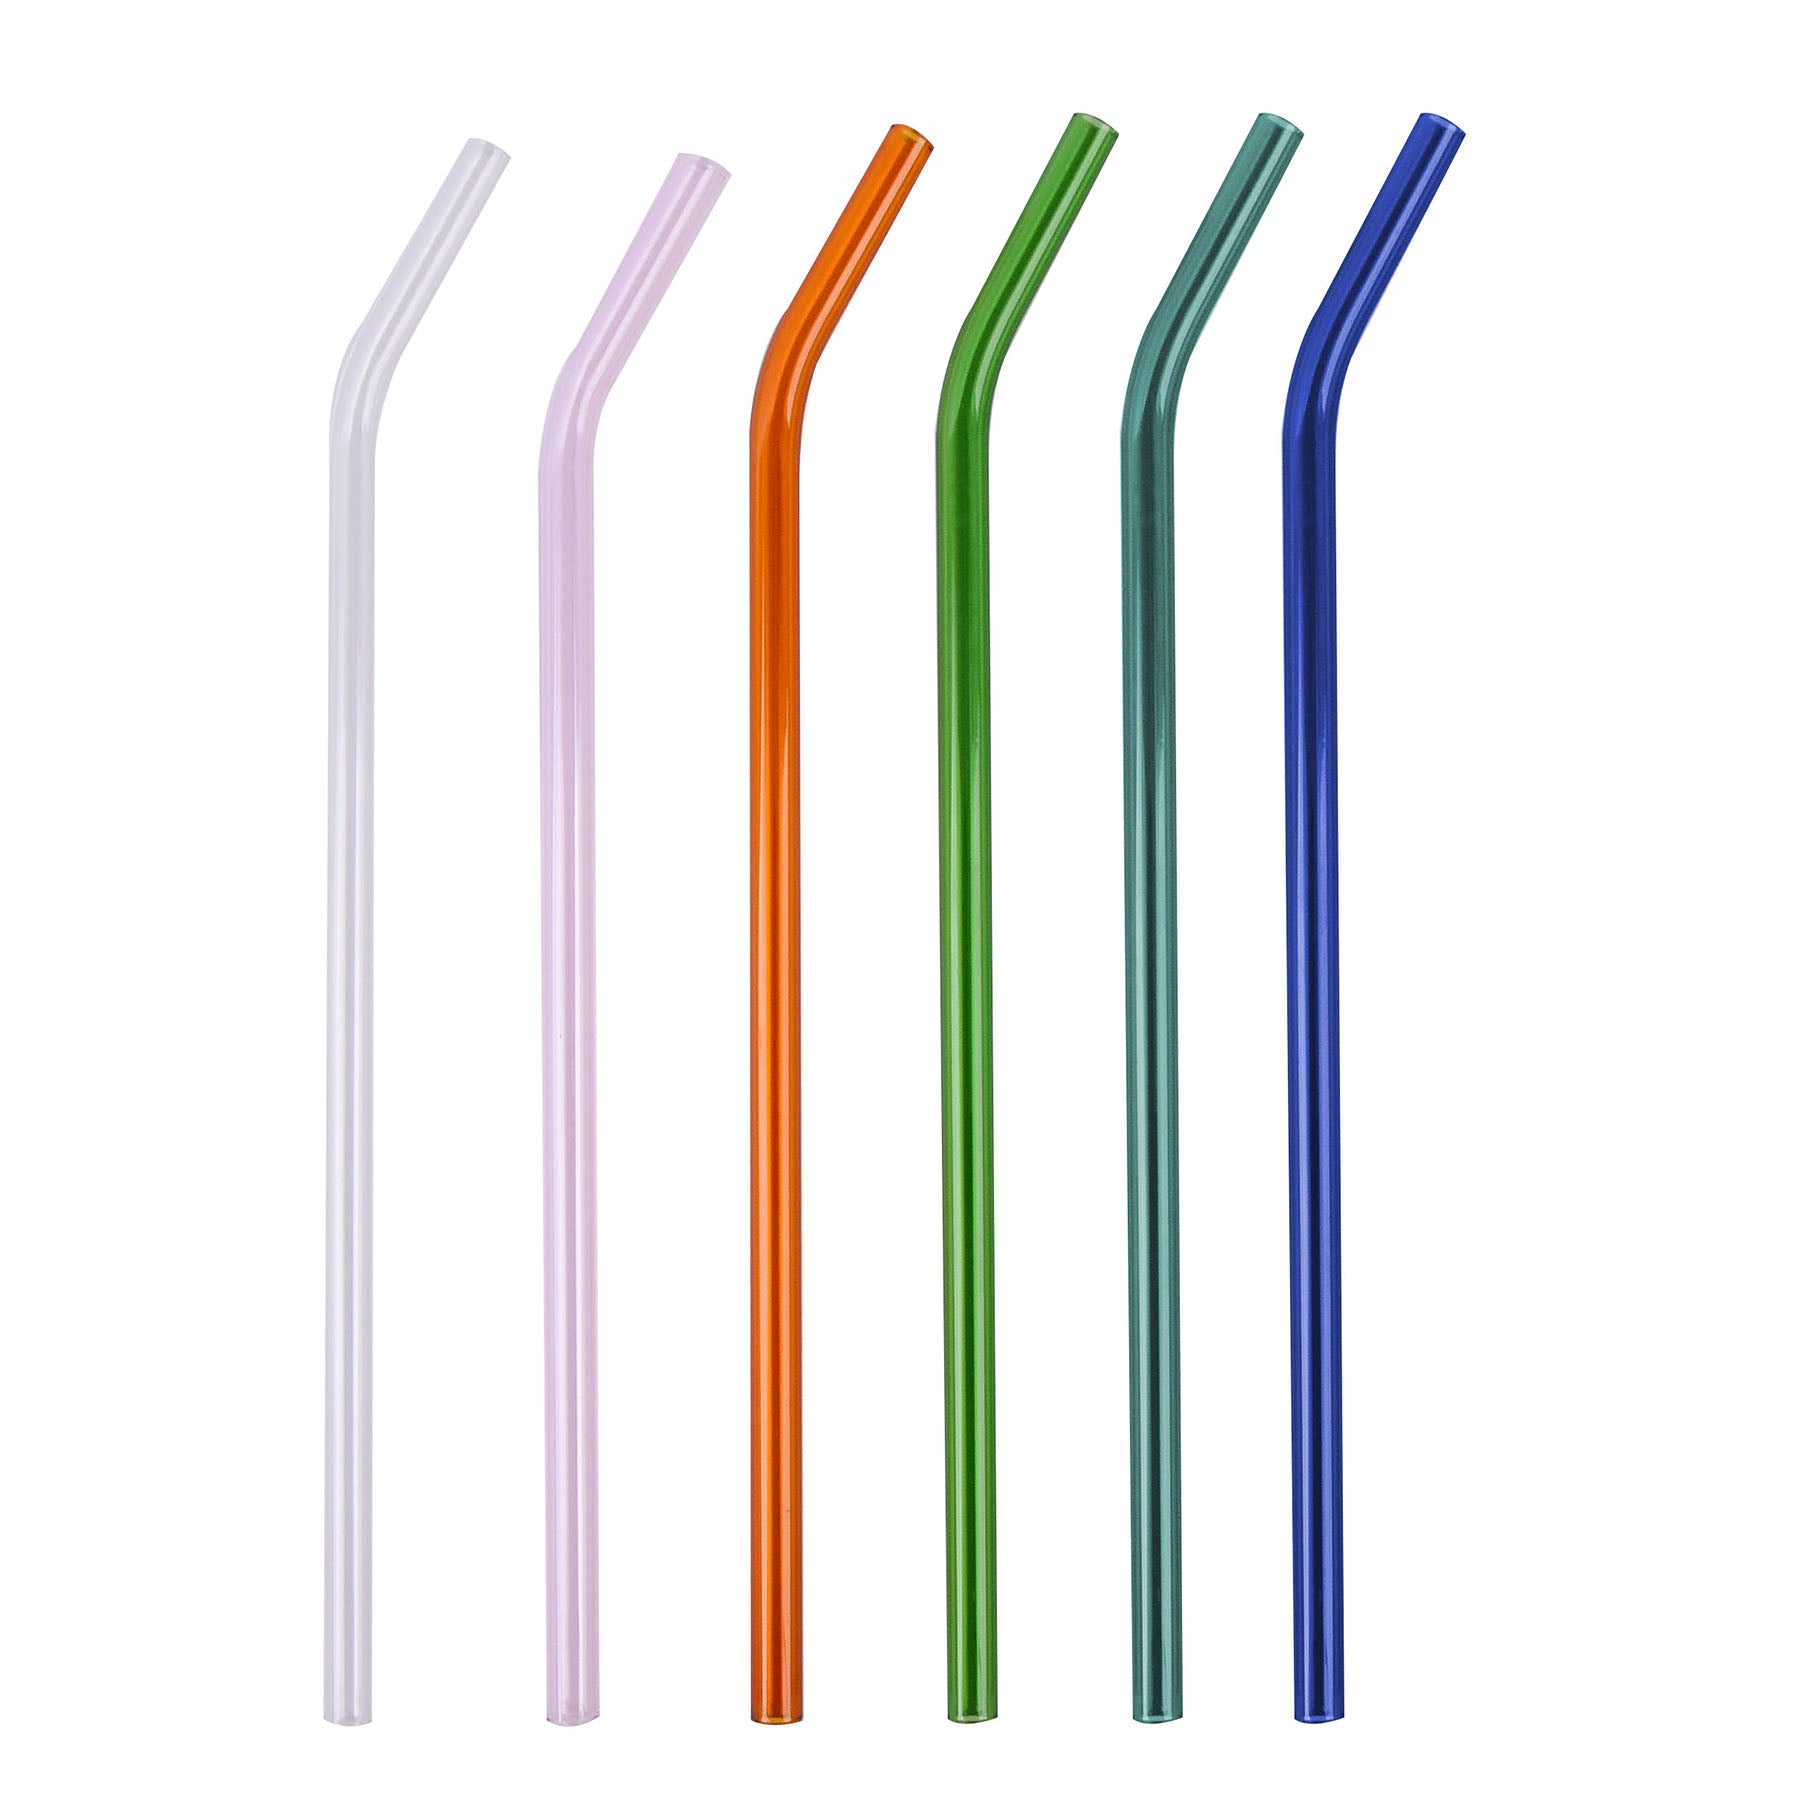 Double wall glass straws